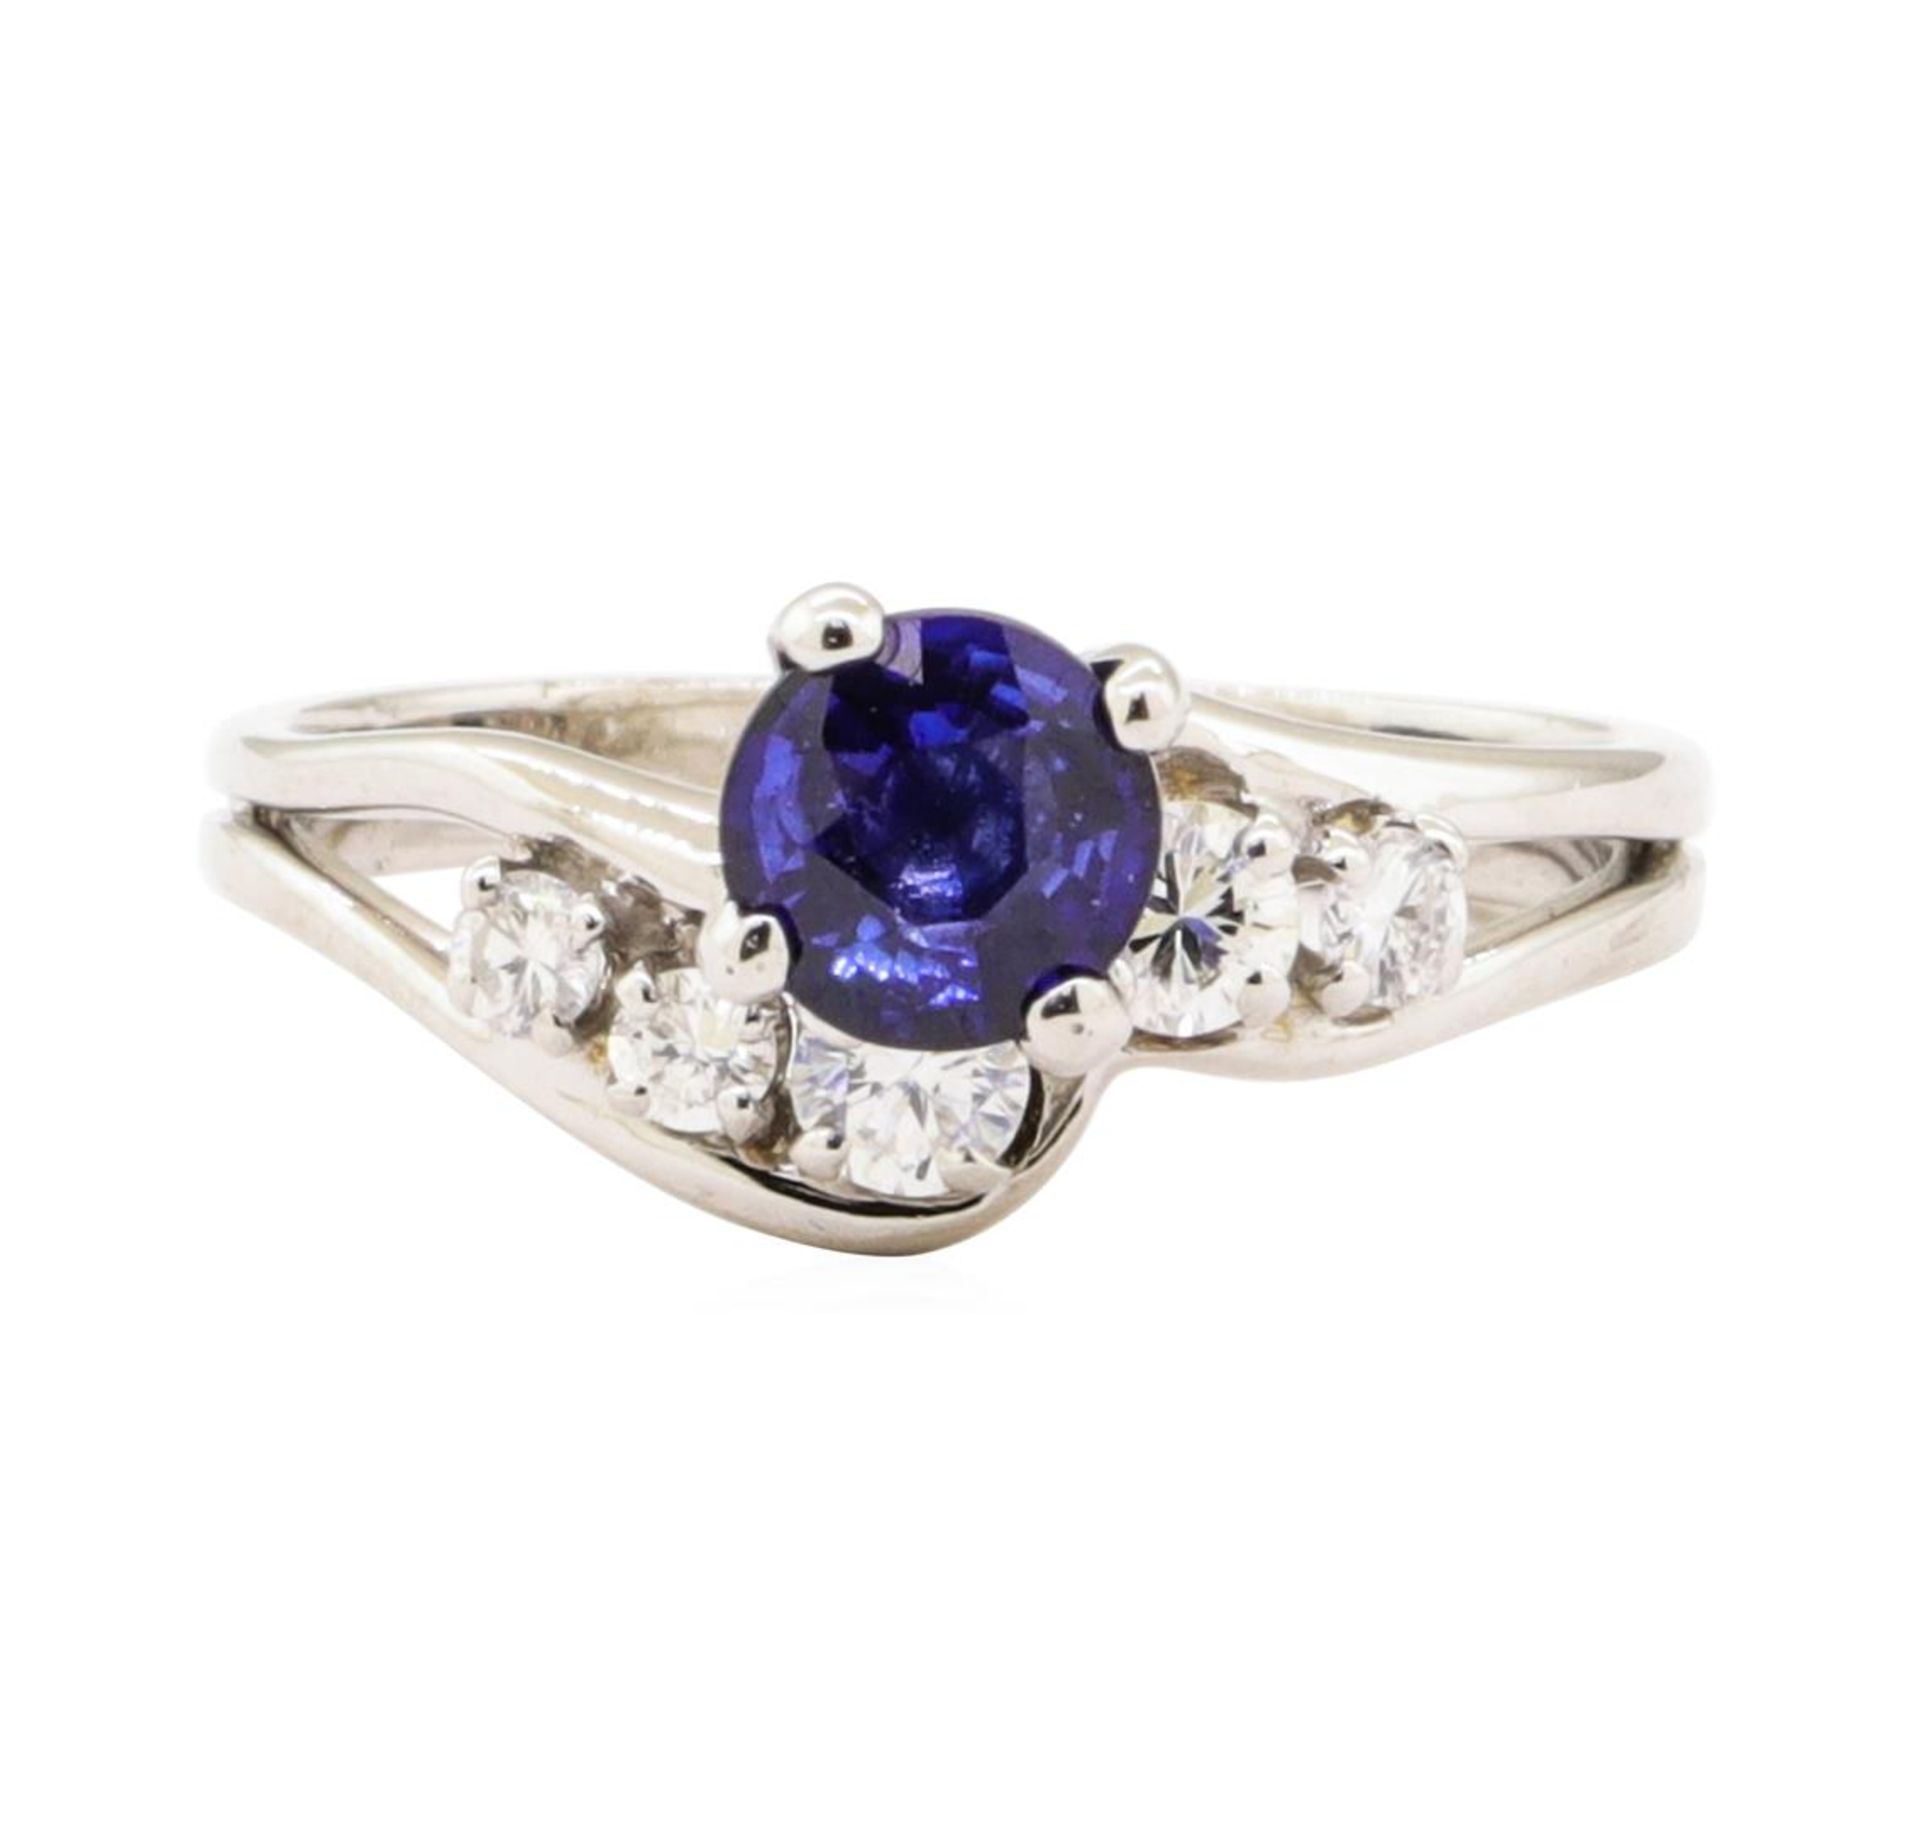 0.92ctw Blue Sapphire and Diamond Ring - 14KT White Gold - Image 2 of 4